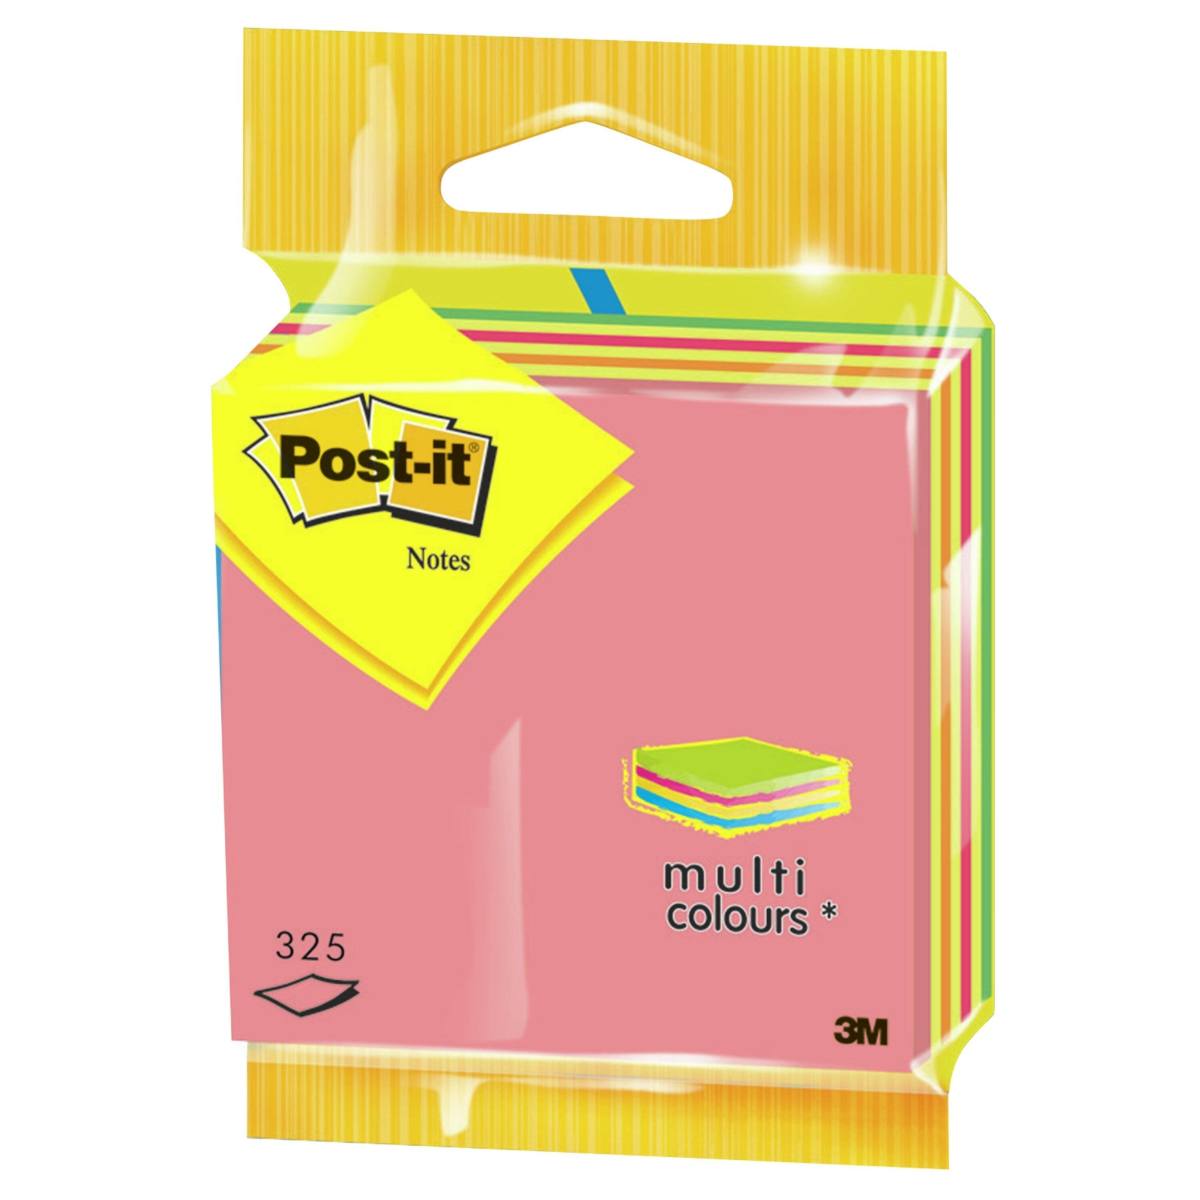 3M Post-it Cube 2014LP, 76 mm x 76 mm, neon green, neon pink, pink, 1 cube of 325 sheets